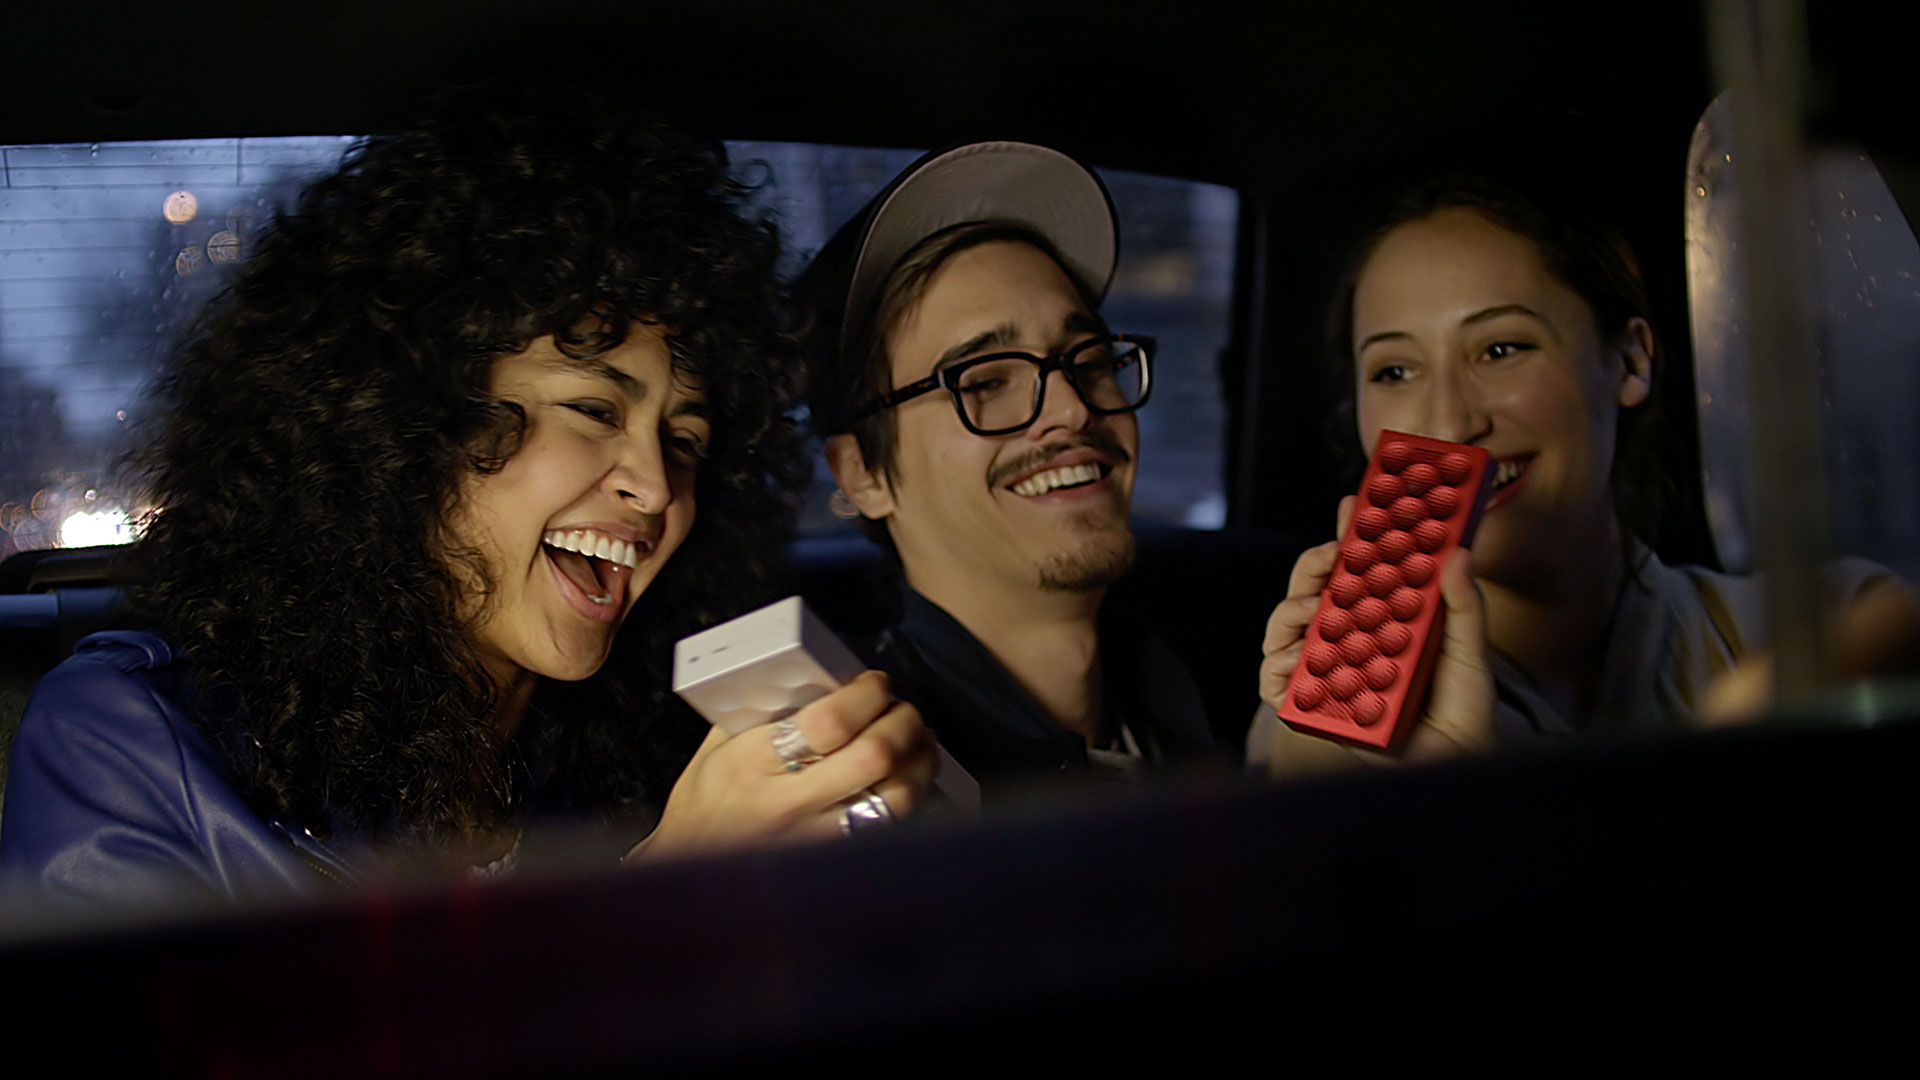 Mini Jambox: The World is Your Venue